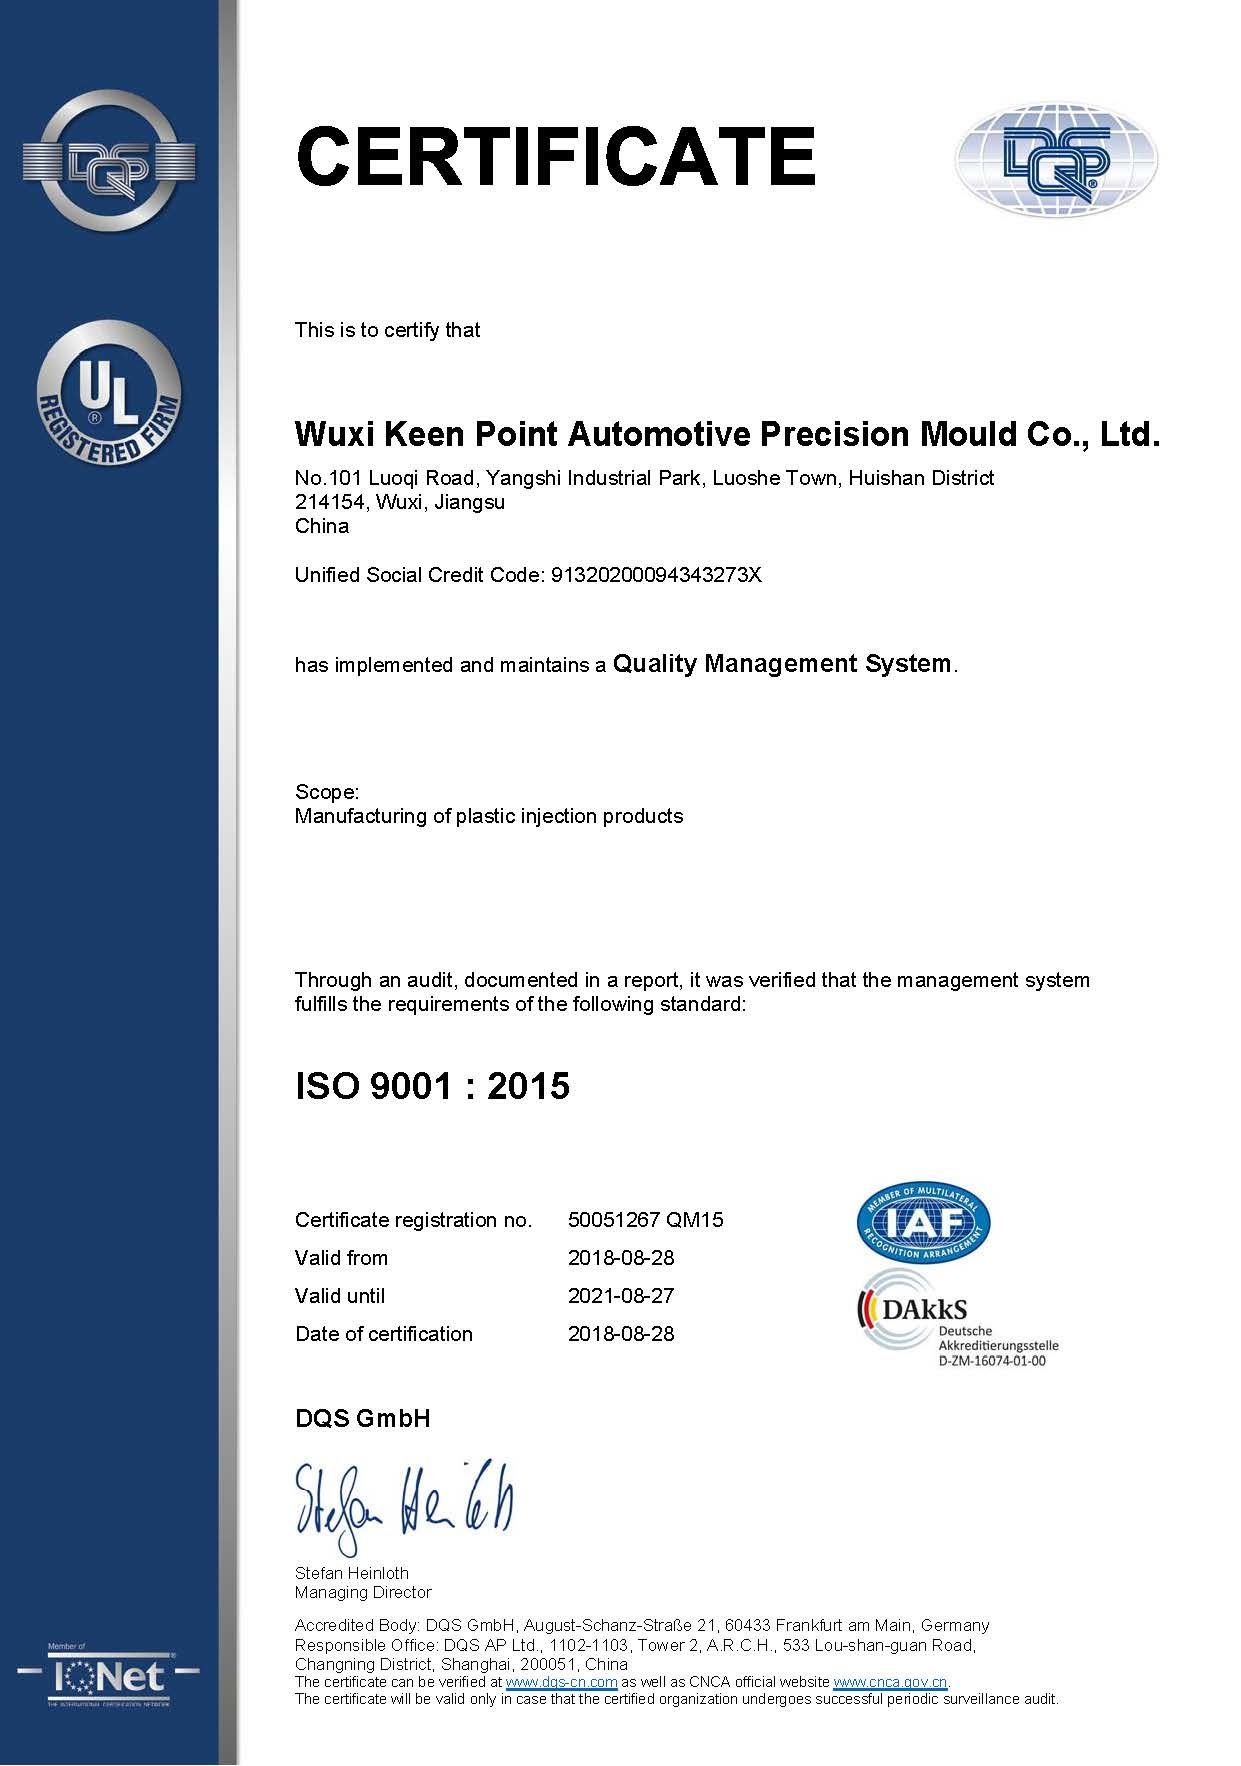 ISO 9001 Certificate of Wuxi Keen Point Automotive Precision Mould Co., Ltd.